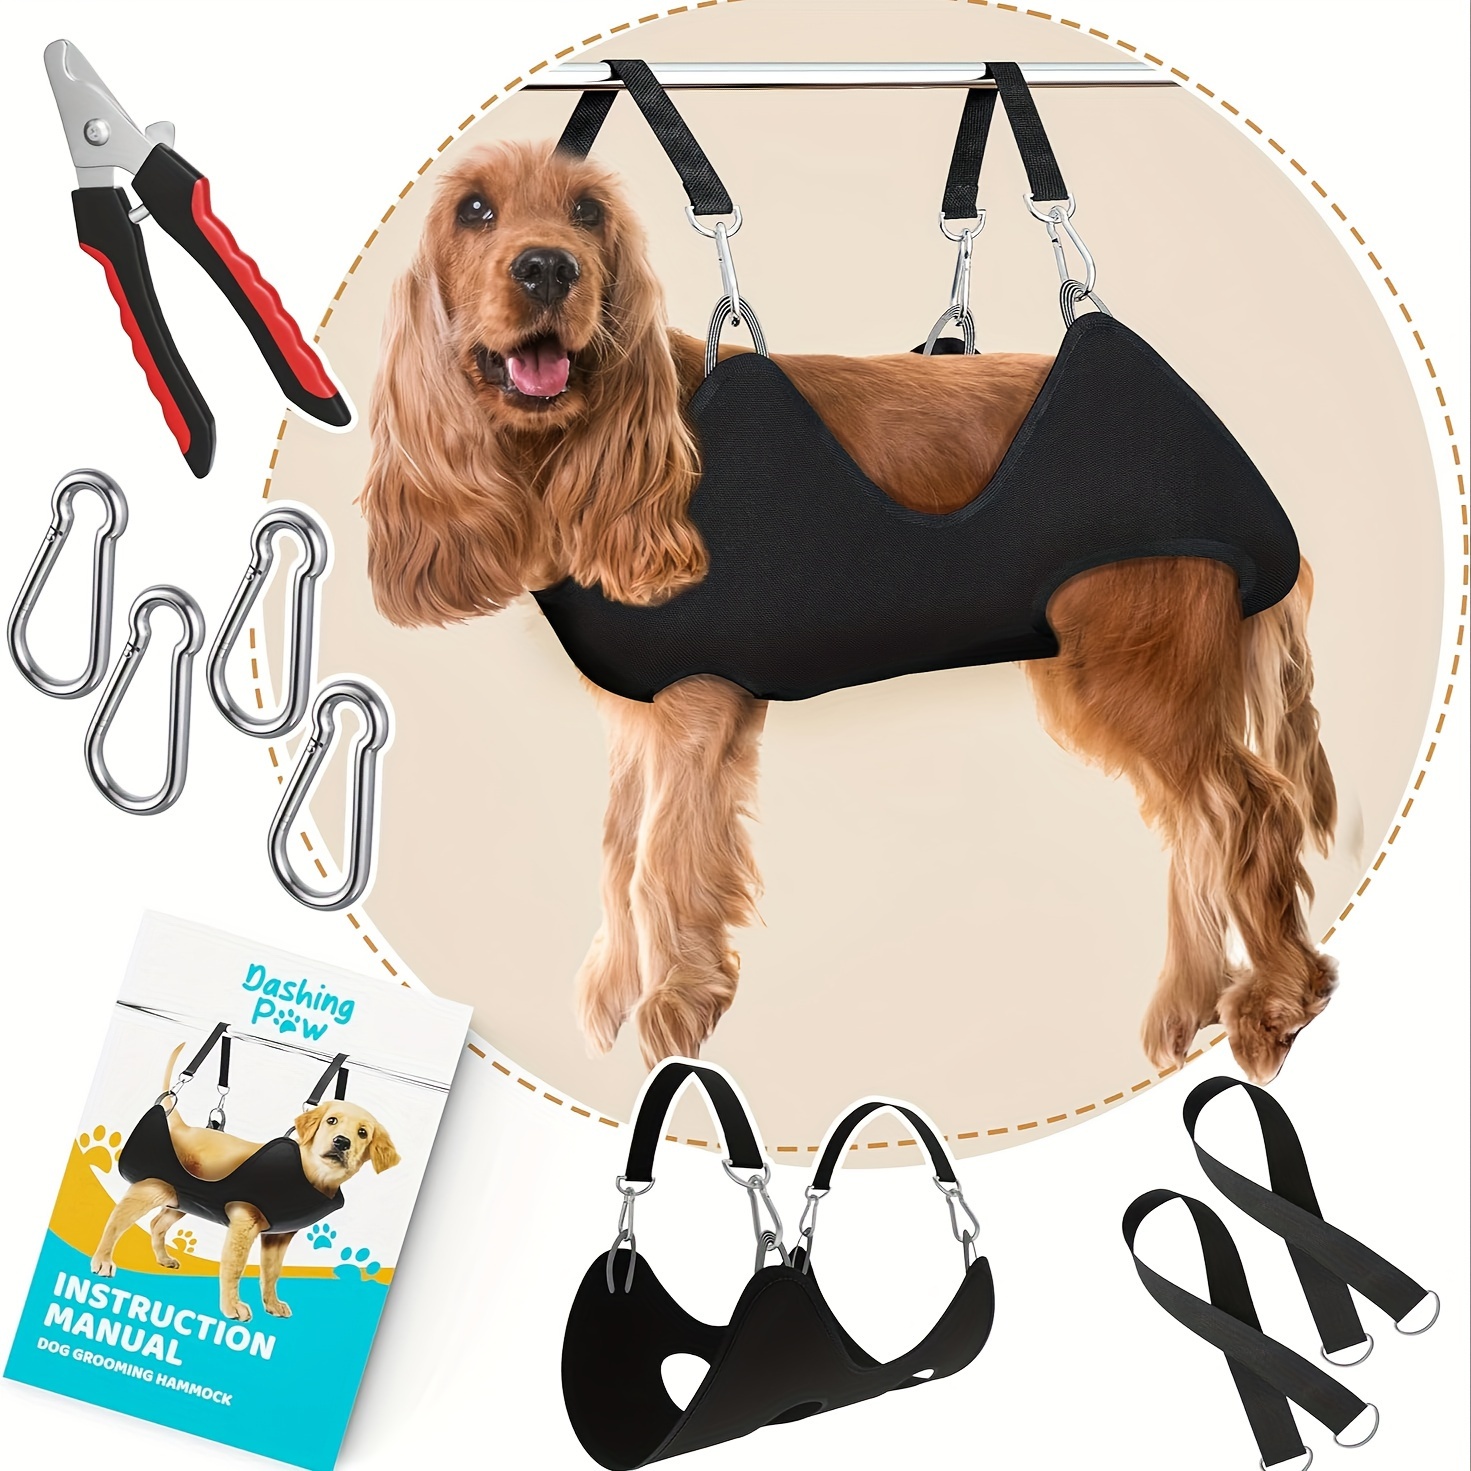 

Dog Grooming Hammock Sturdy & Safe Dog Hammock For Grooming With Durable Carabiner Clips & Straps Soft, Comforting Dog Grooming Harness Pet Grooming Hammock + Nail Trimmer For Large Dogs